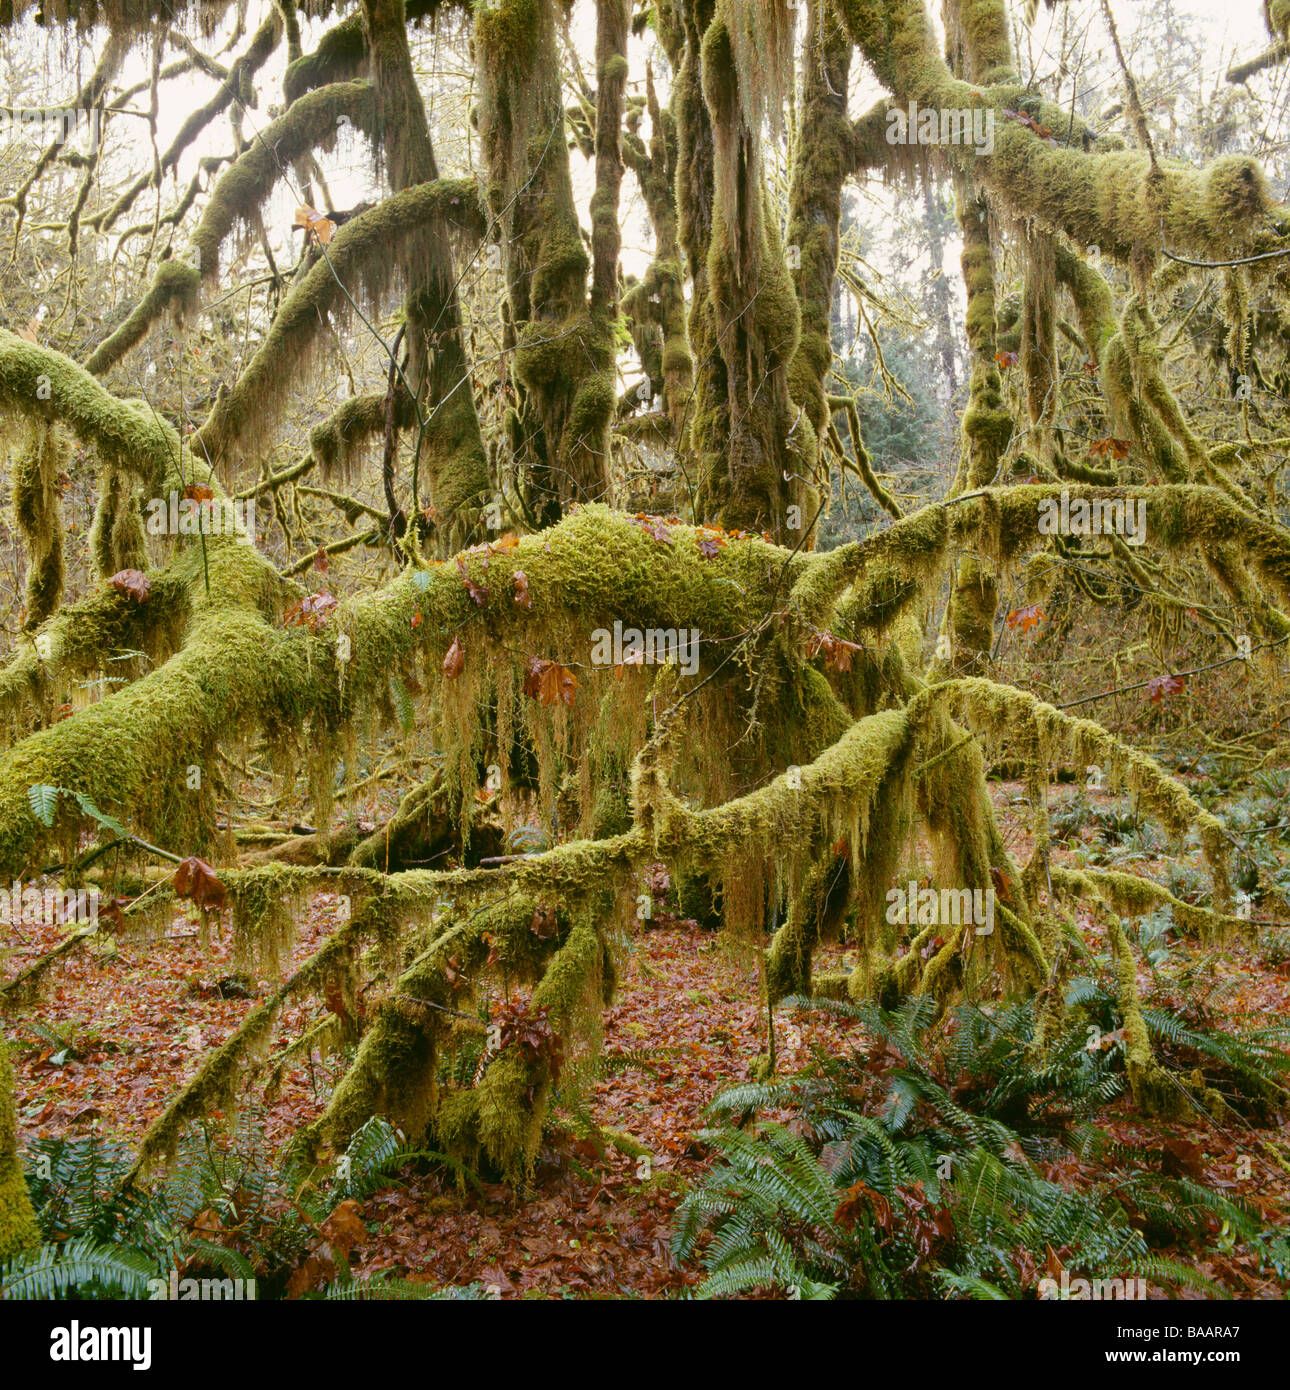 Moss grown on tree branches Stock Photo